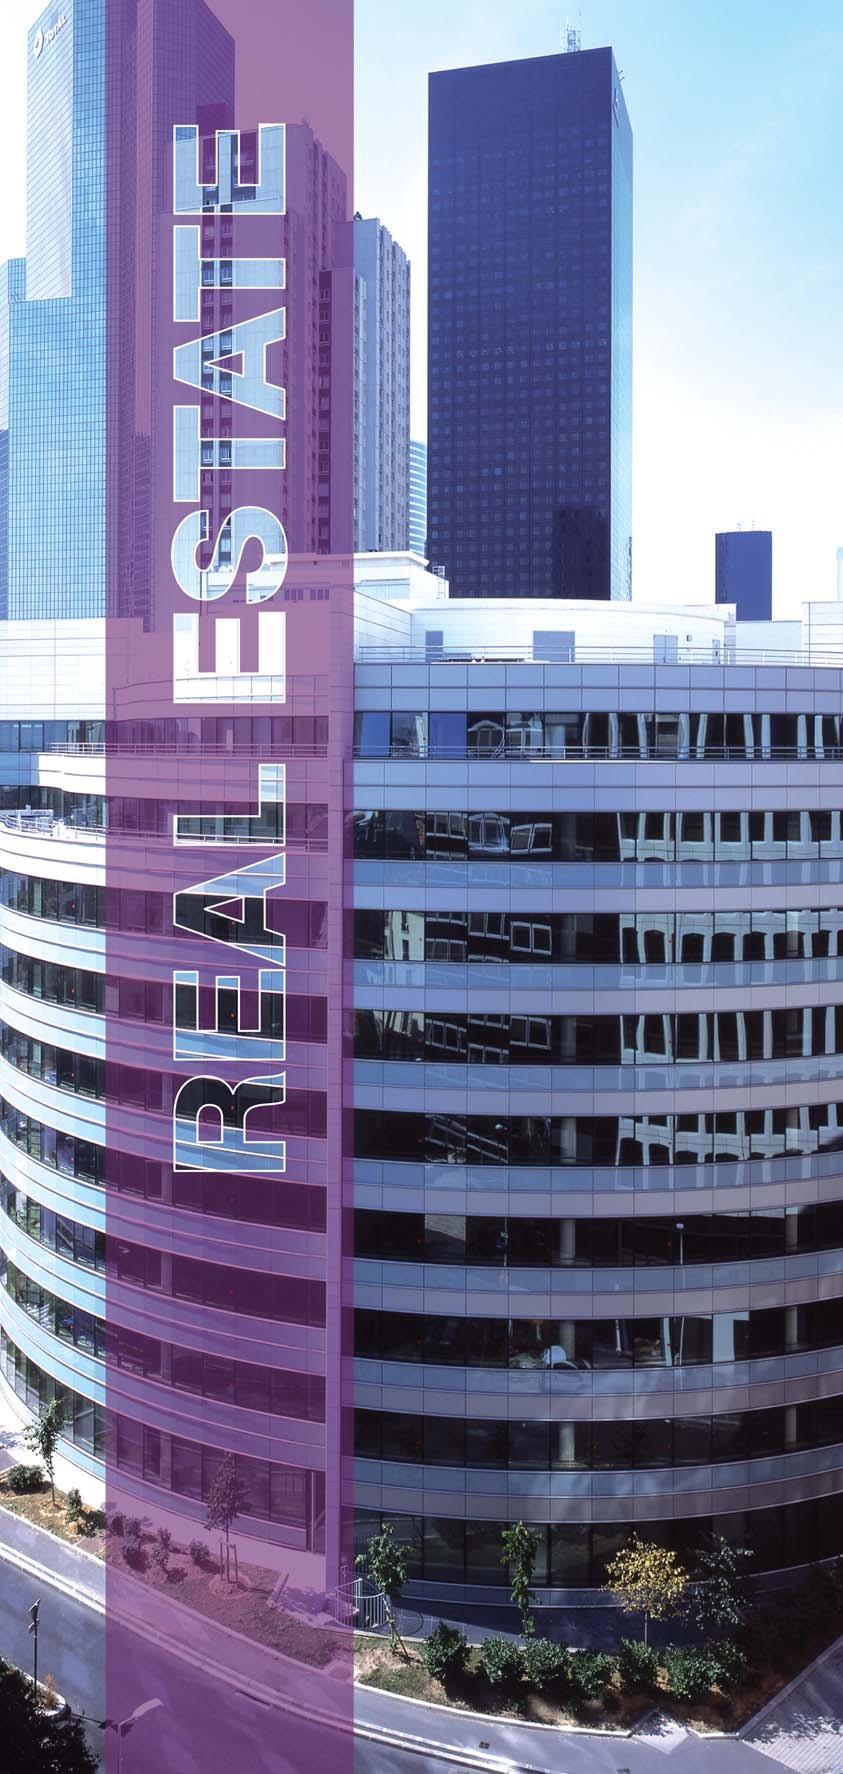 Realia invests 118 million euros in acquiring a building in Paris The estate company Realia increases its assets portfolio following the acquisition of a new office building in the French capital